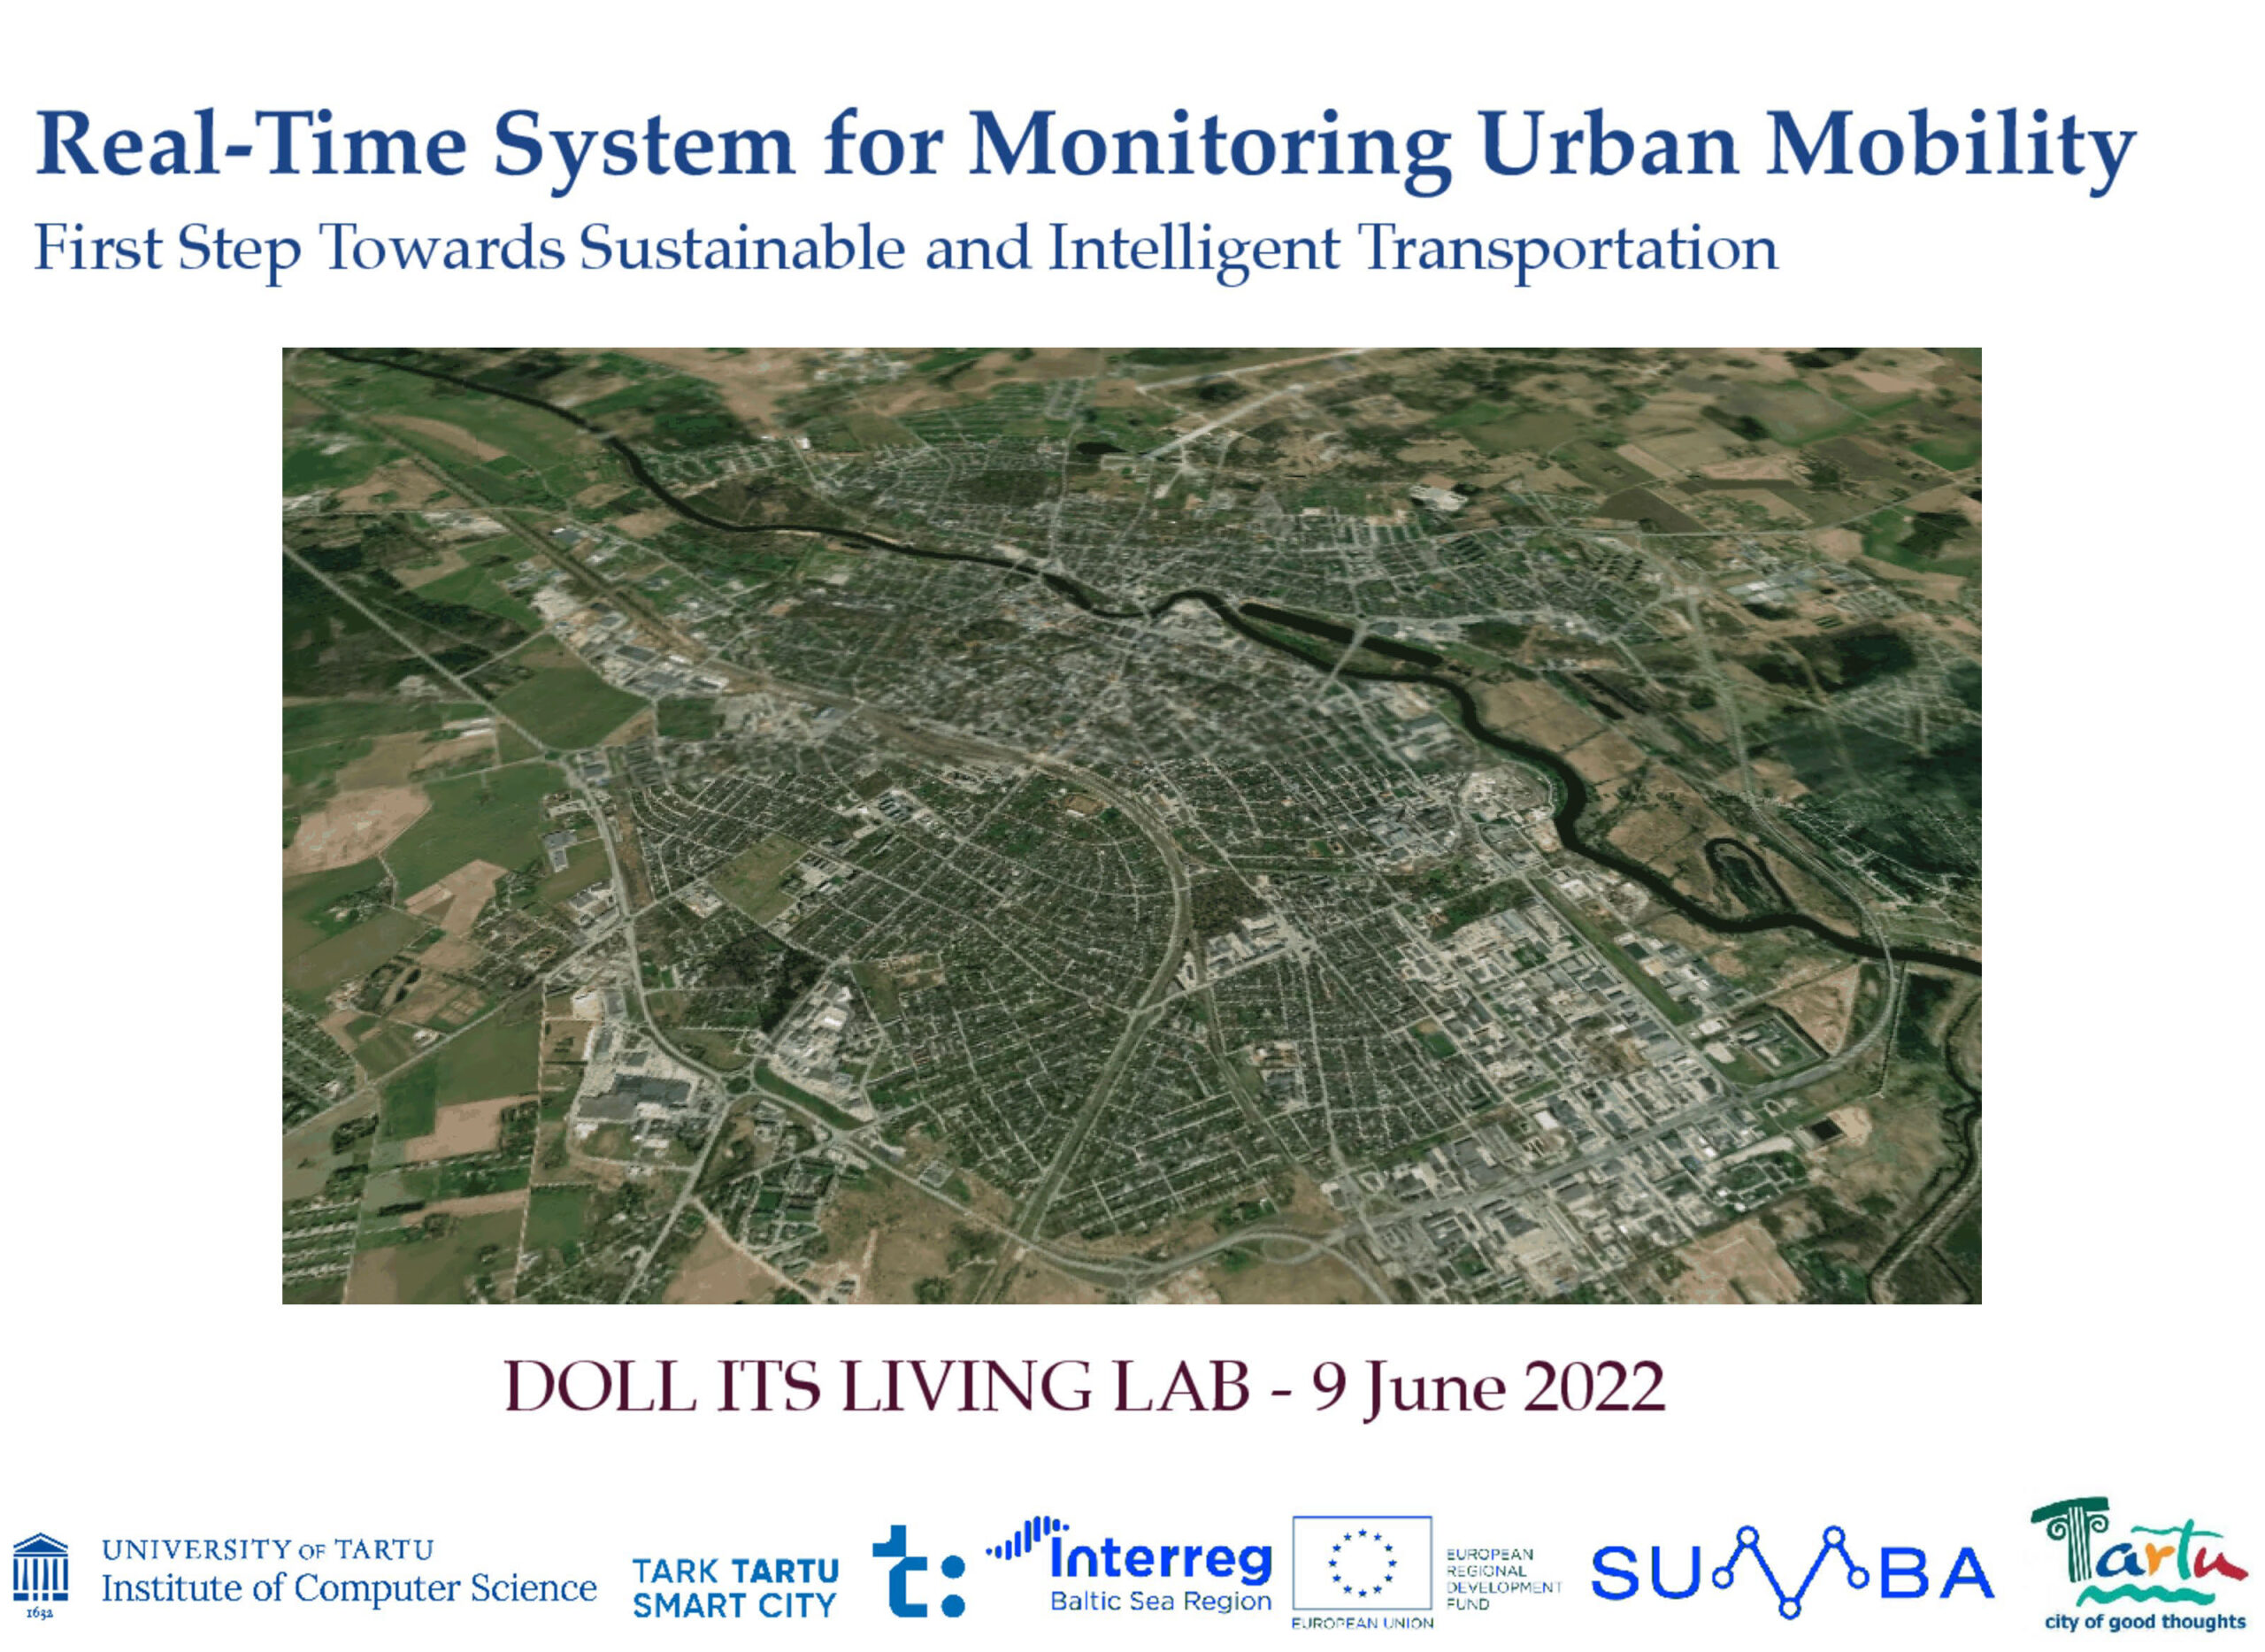 Real-Time System for Monitoring Urban Mobility; First Step Towards Sustainable and Intelligent Transportation  